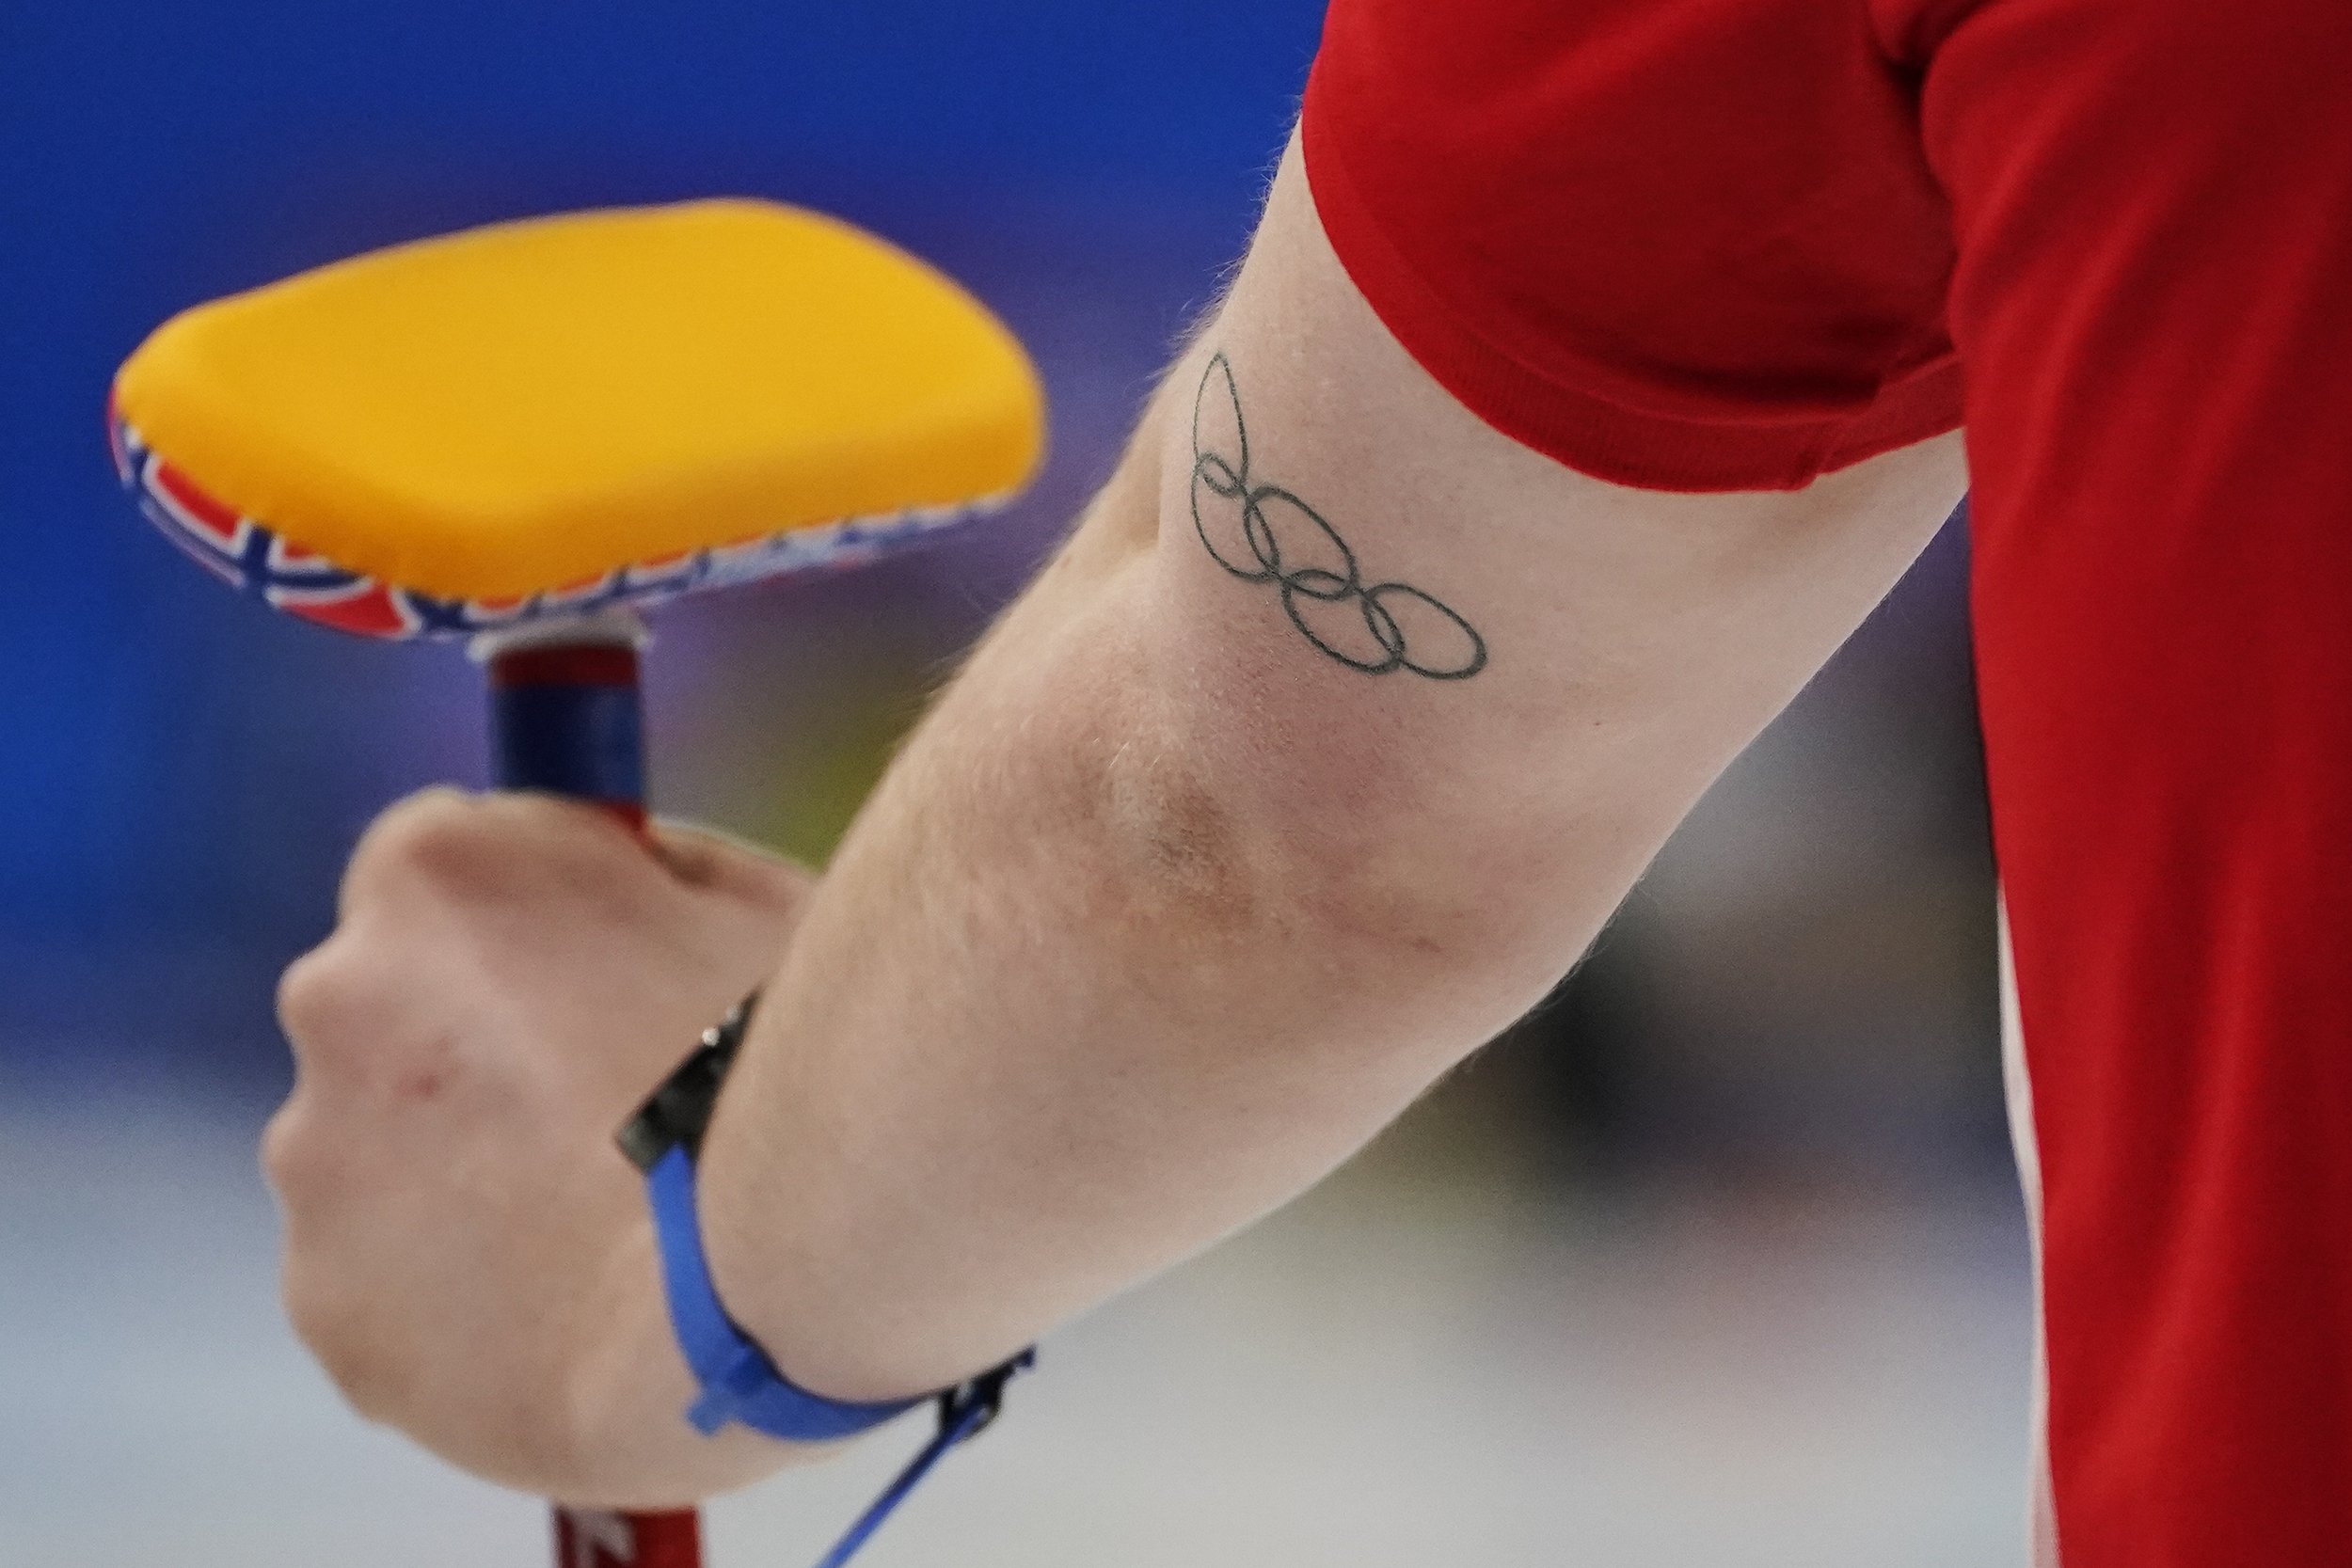  Magnus Nedregotten, of Norway, holds a brush and has an Olympic rings tattoo on his arm during the mixed doubles curling match against the Czech Republic at the Beijing Winter Olympics Wednesday, Feb. 2, 2022, in Beijing. (AP Photo/Brynn Anderson) 